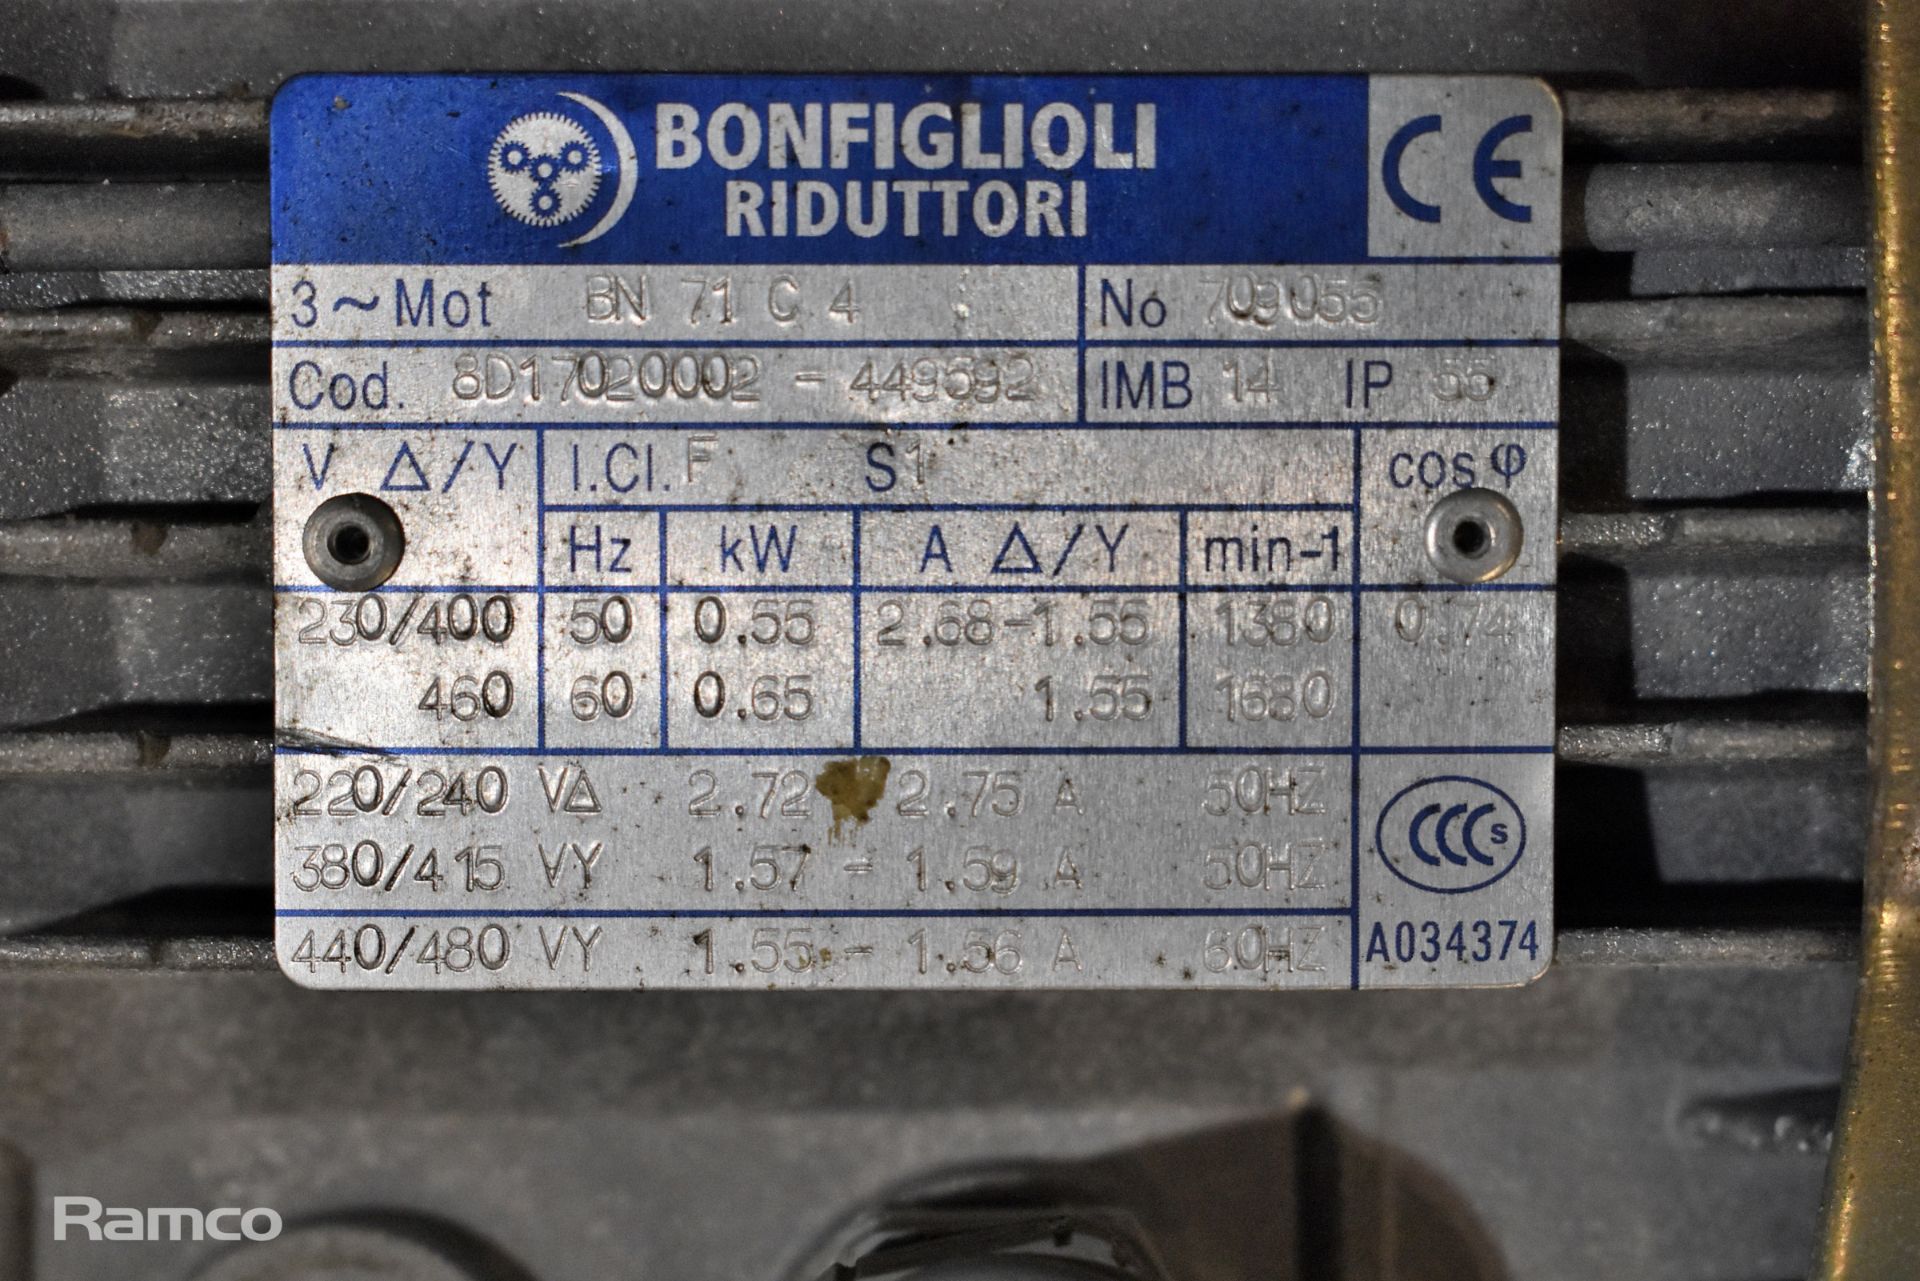 Bonfiglioli BN71C4 220-480V 3-phase electric motor with VF44F ratio 35:1 gearbox - Image 5 of 5